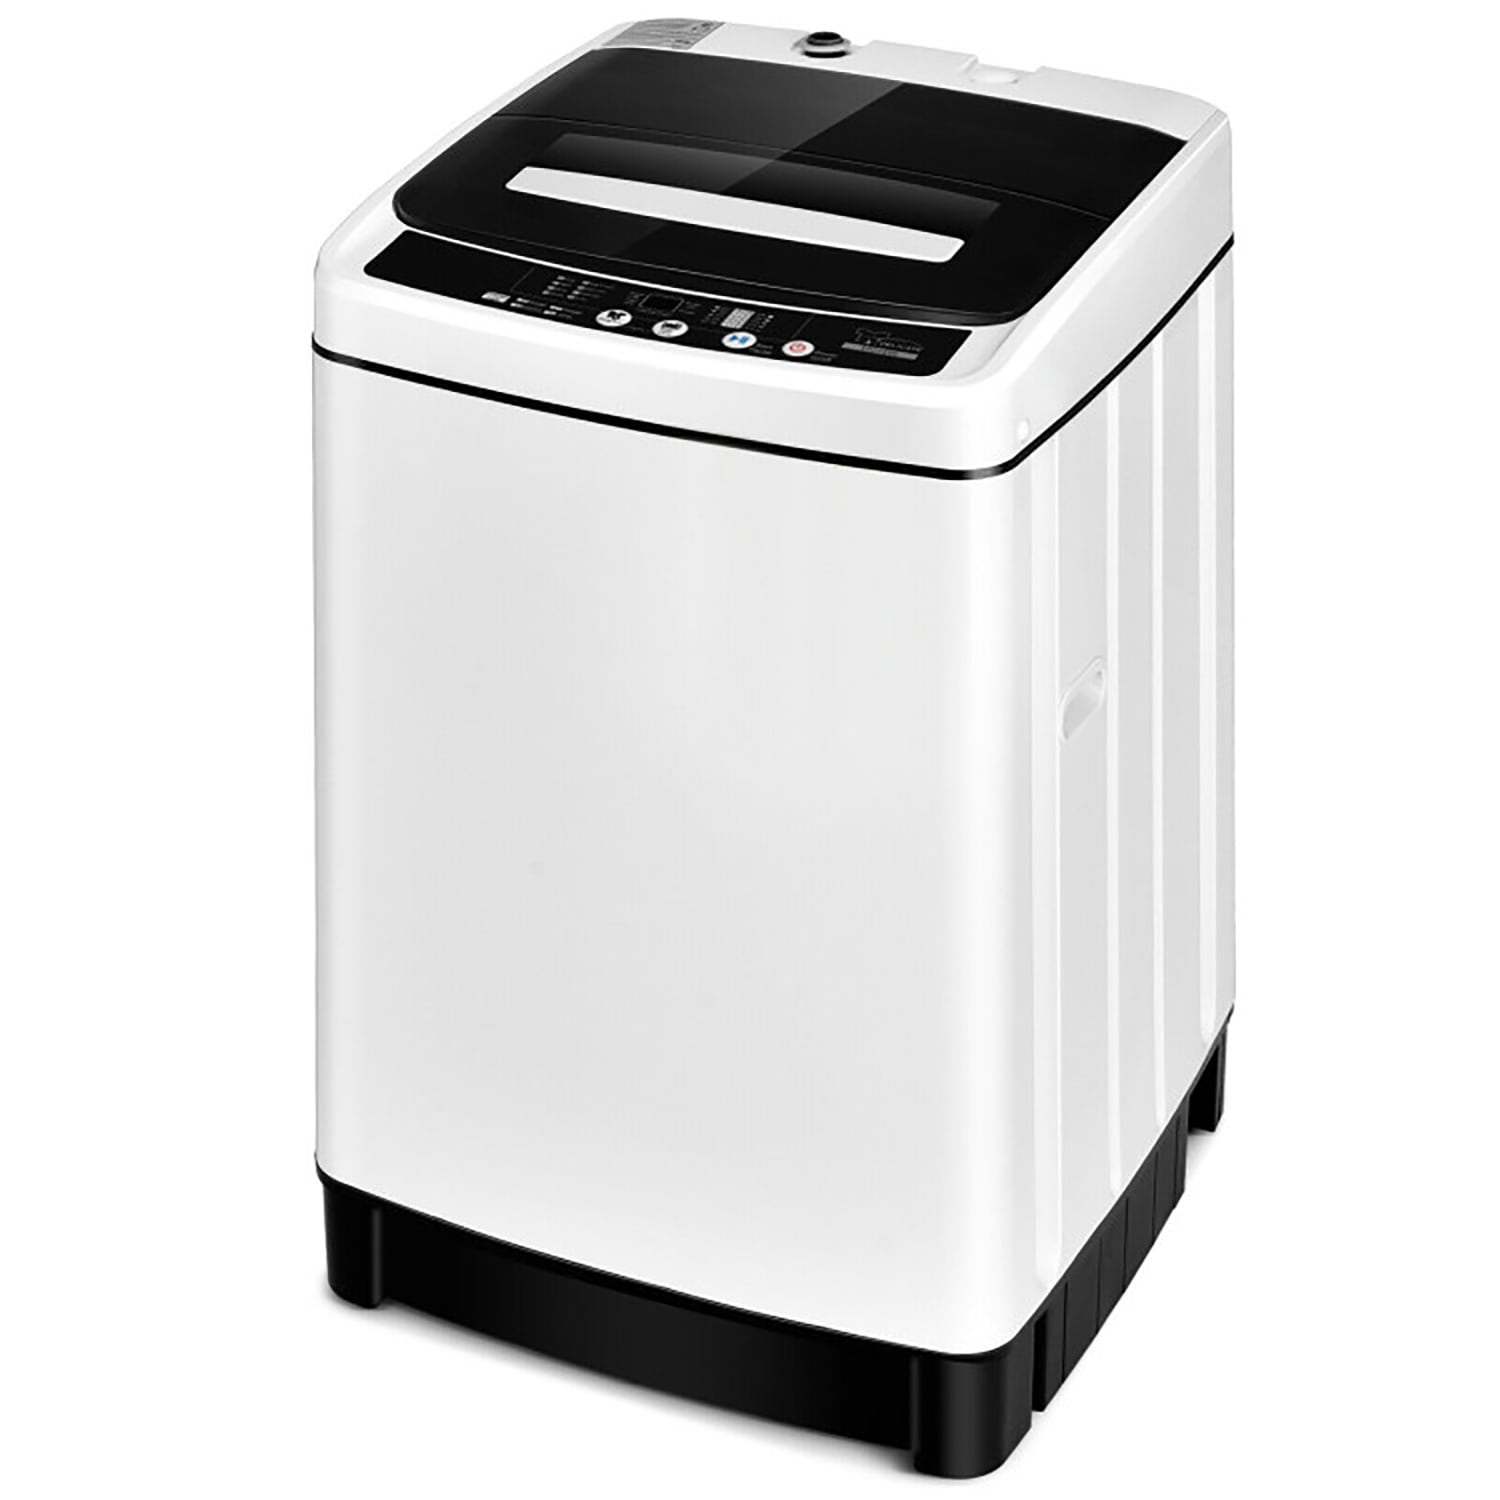 Insignia™ 4.1 Cu. Ft. High Efficiency Top Load Washer White NS